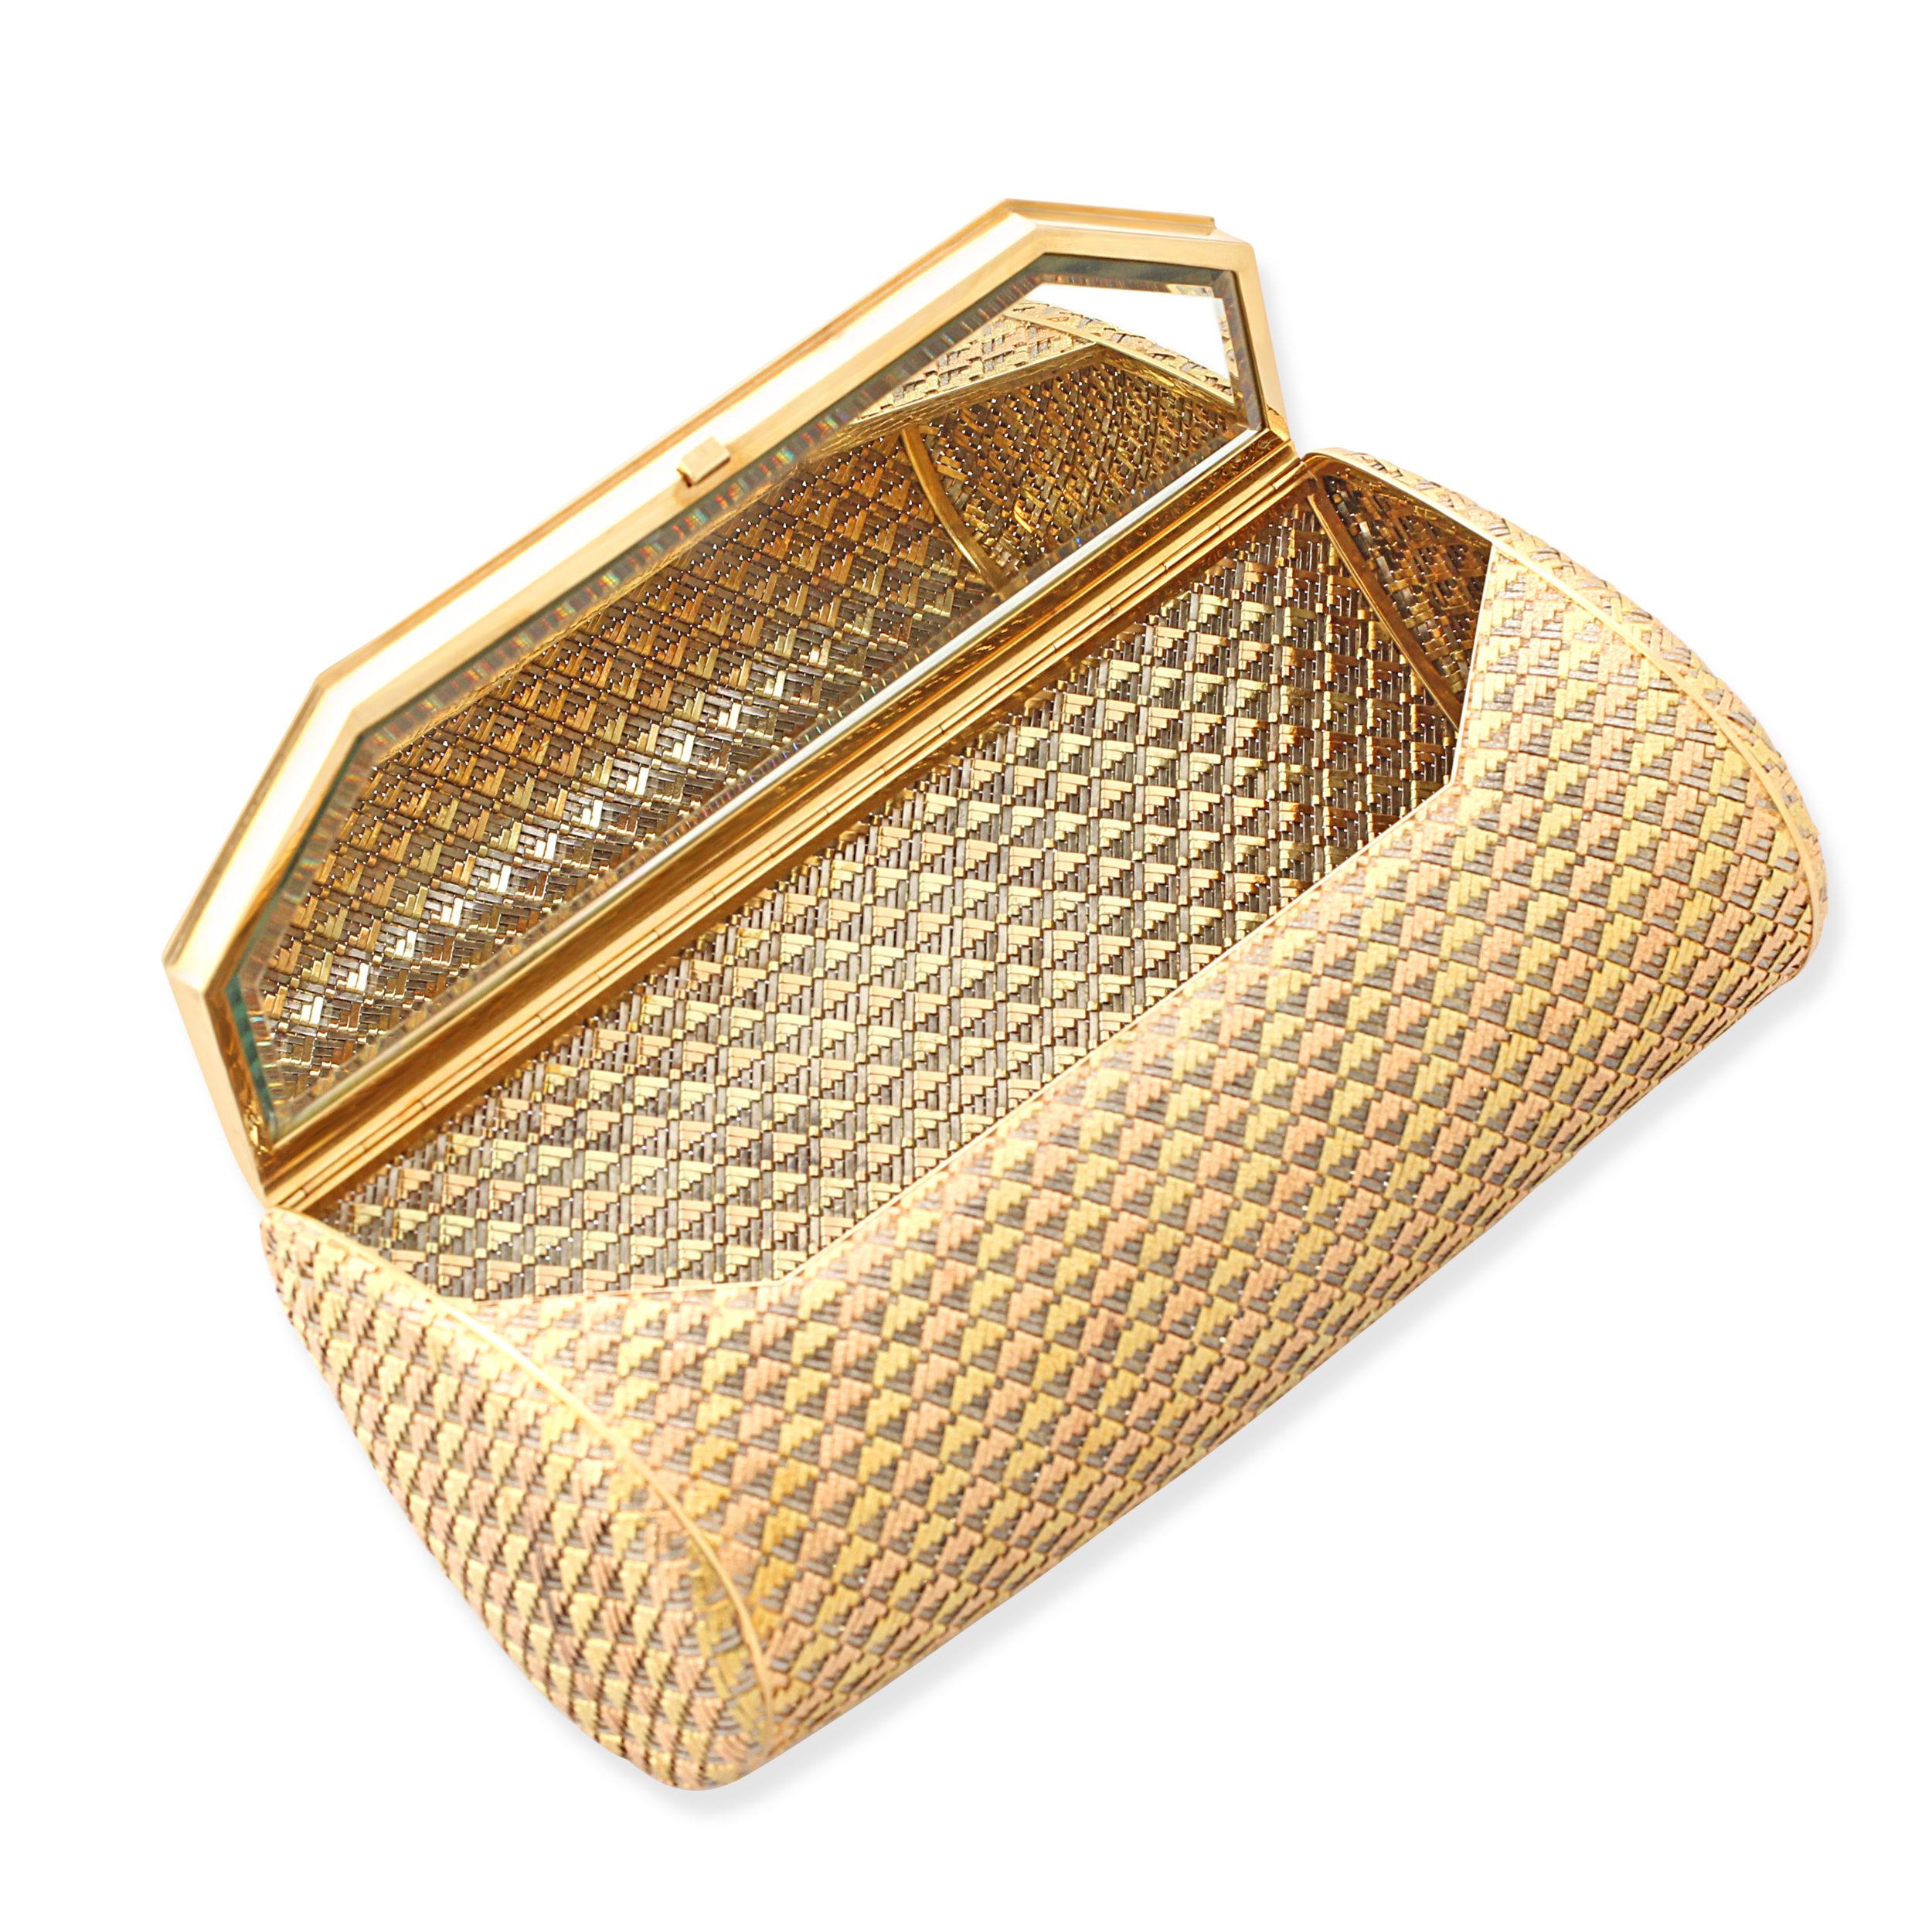 A French 18k gold clutch bag by Boucheron. Woven from 18k yellow, rose and white gold in a textured design with a mirror inside. French assay marks & makers mark for Soubrenie et Bois. Soubrenie et Bois made vanity cases, compacts, cigarette cases